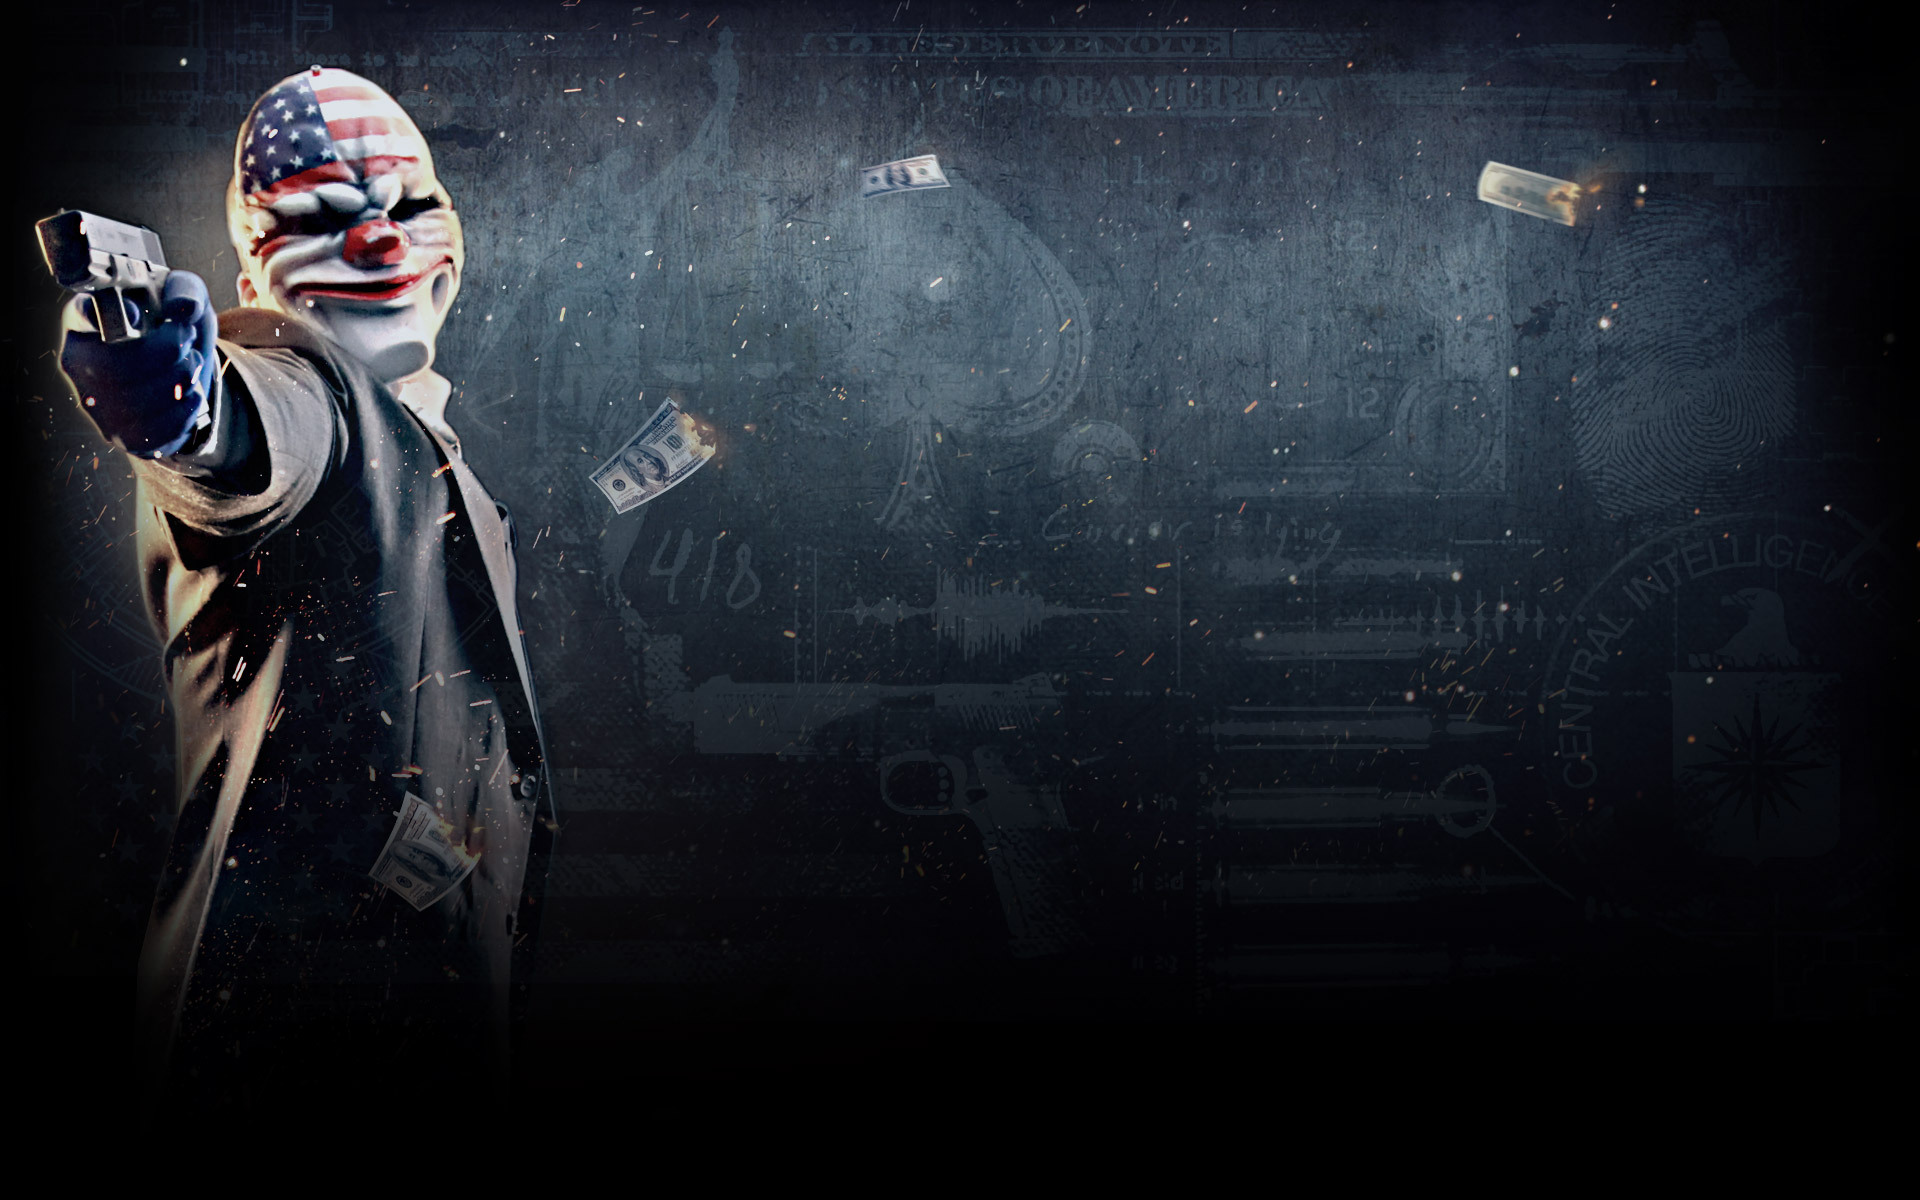 Image Payday Background Jpg Steam Trading Cards Wiki